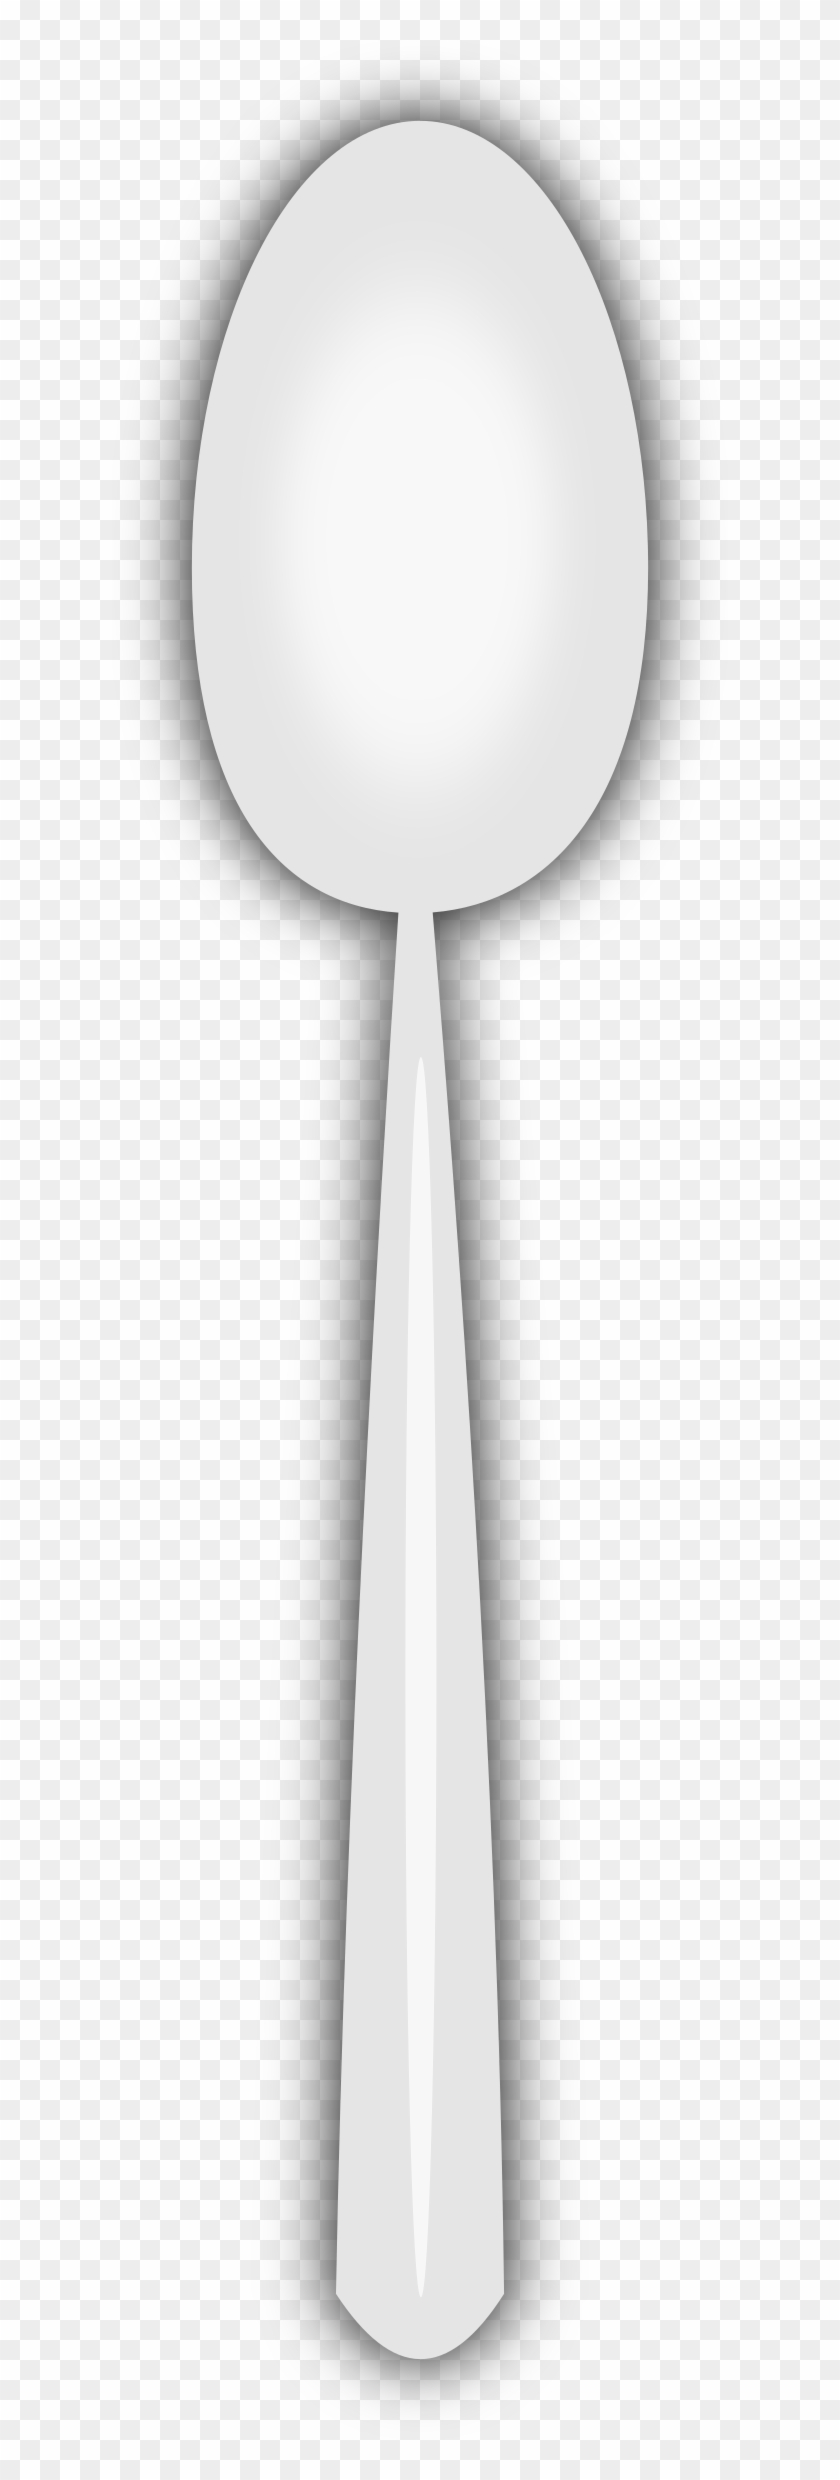 Plastic Spoon Clipart - White Spoon Vector Png #397904